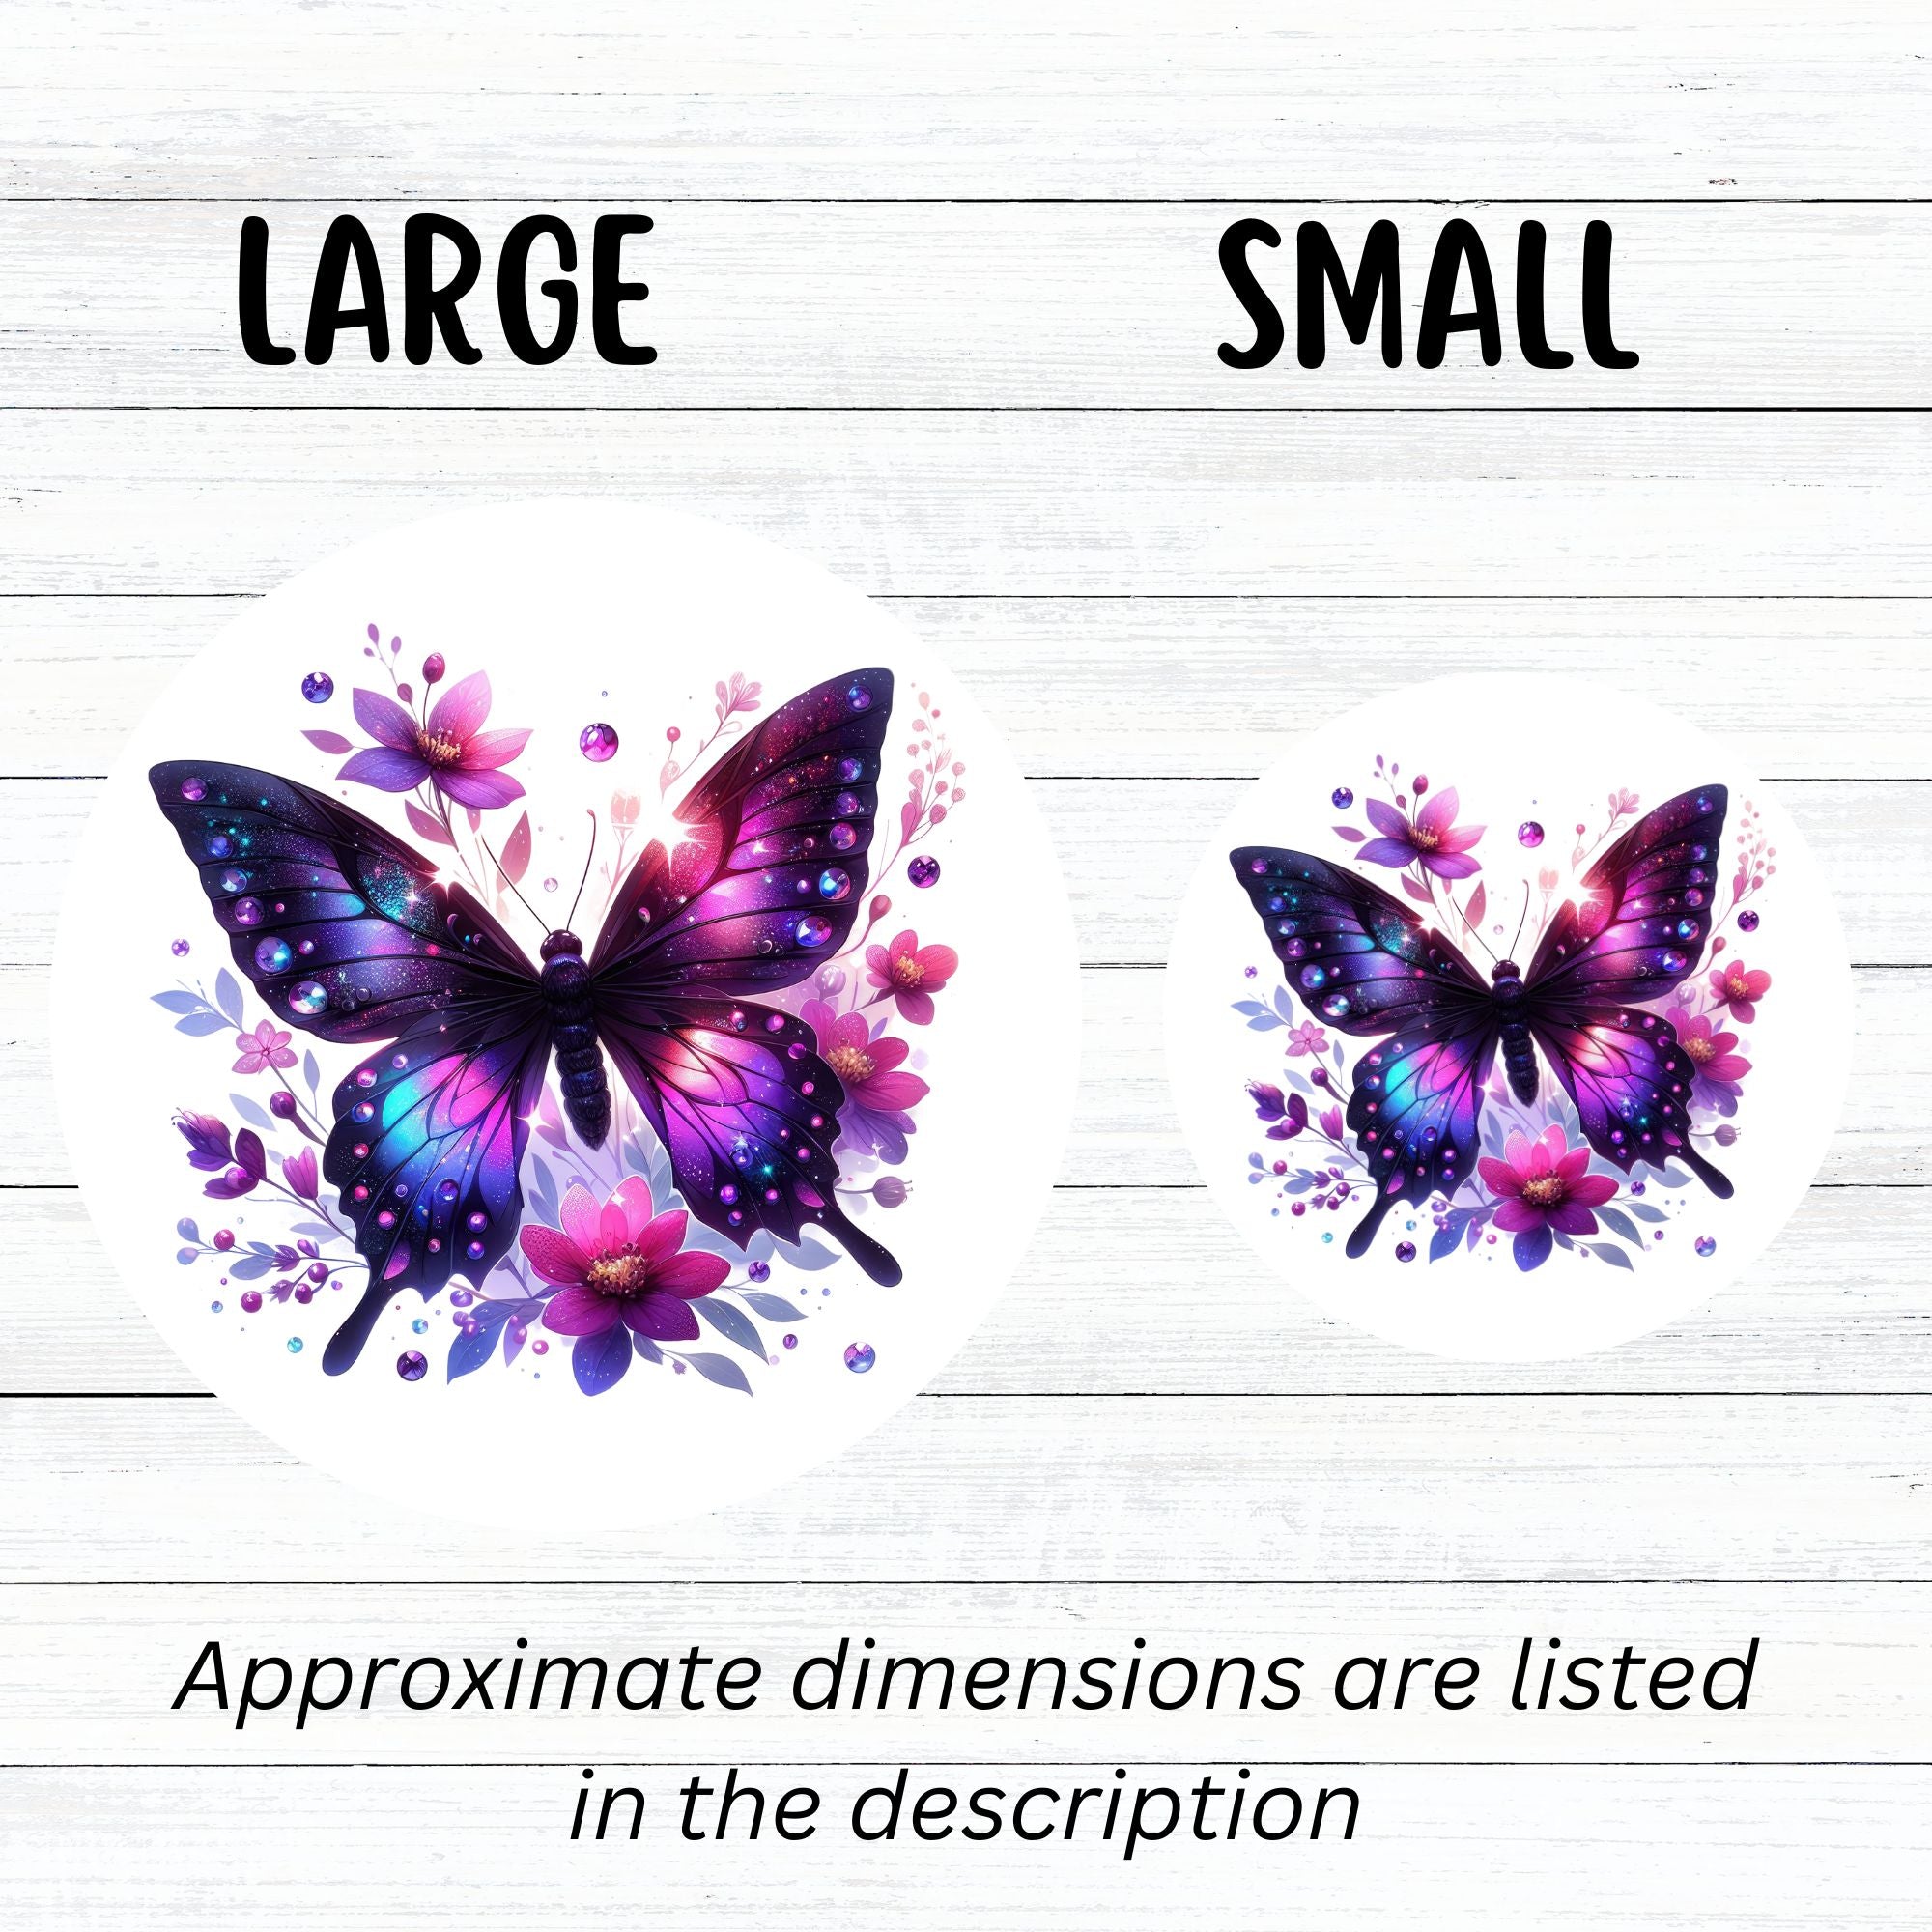 This image shows small and large Purple Butterfly with Stars die cut stickers next to each other.